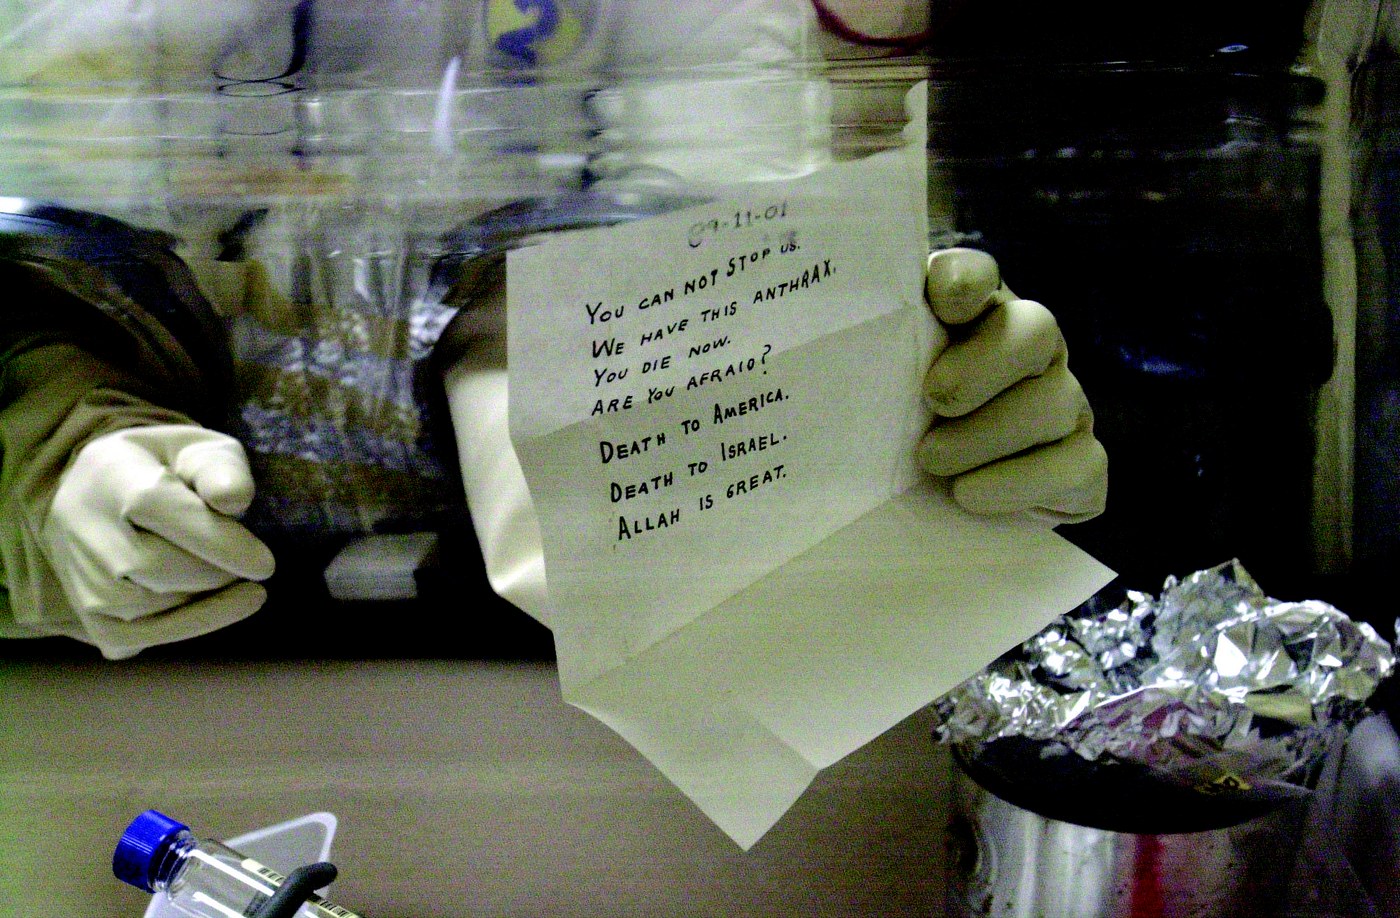 Laboratory technician holding the anthrax-laced letter addressed to Senator Leahy after safely opening it at the U.S. Army's Fort Detrick bio-medical research laboratory in November 2001. FBI